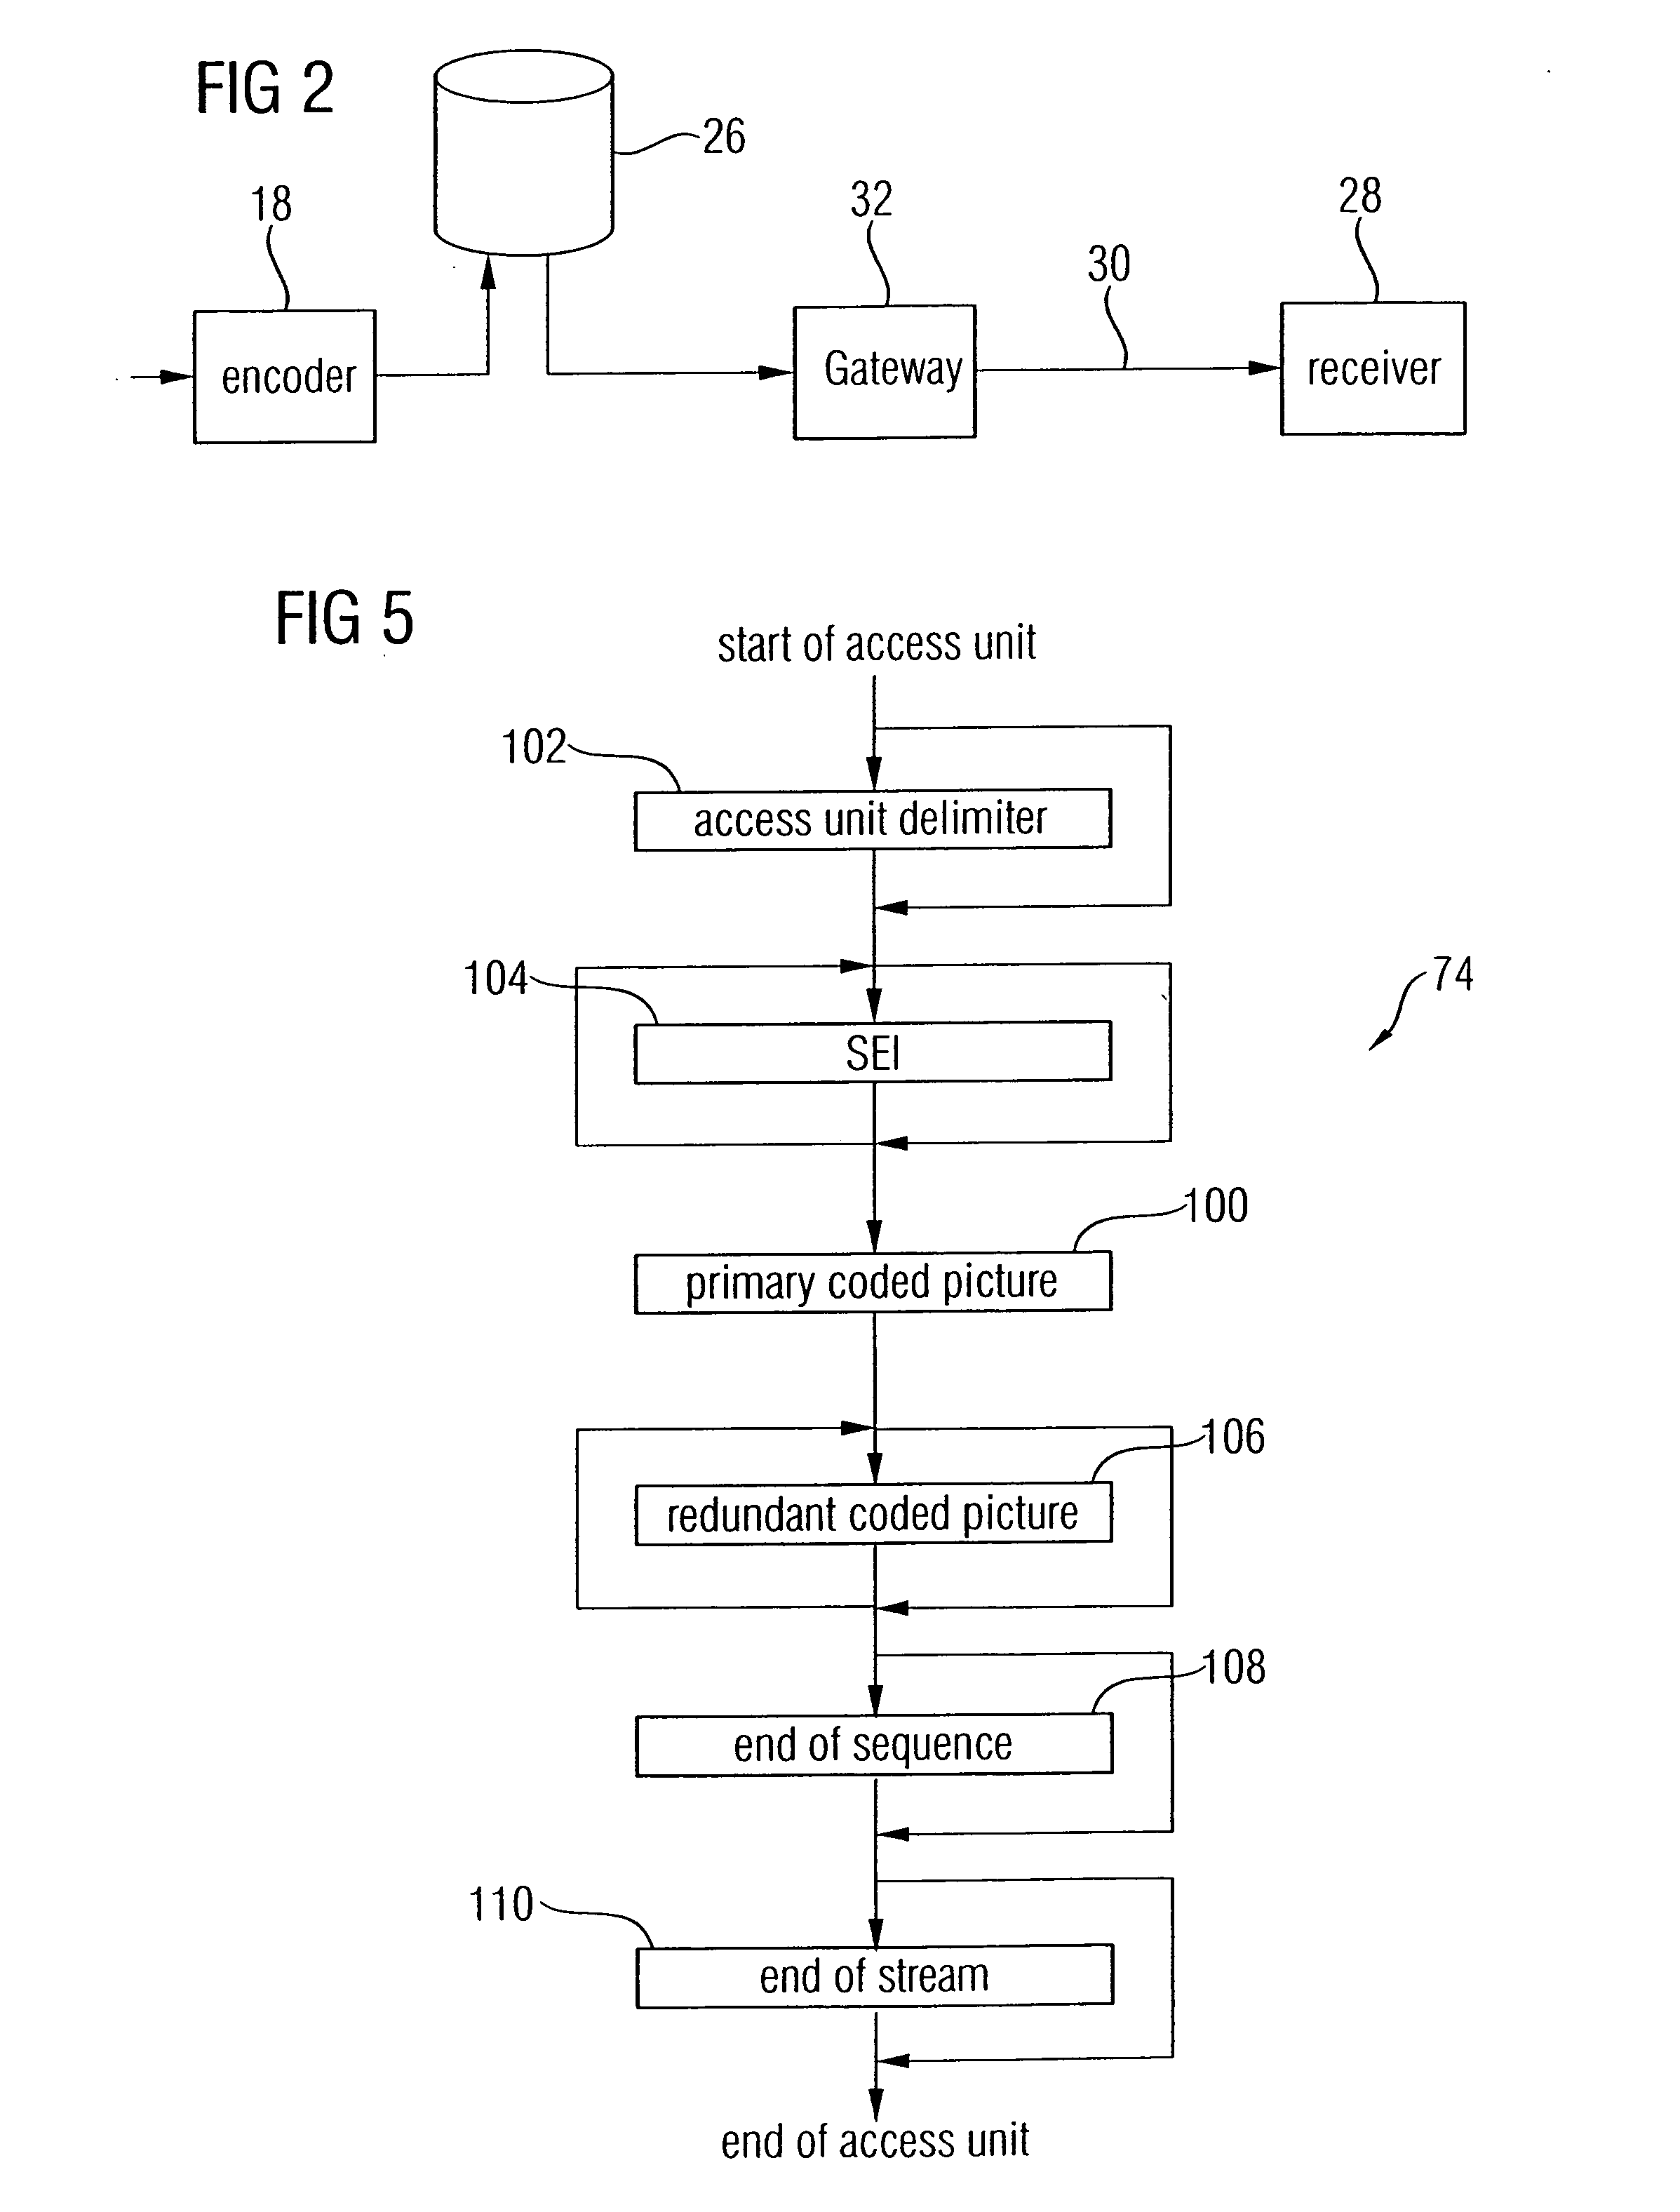 Apparatus and method for coding an information signal into a data stream, converting the data stream and decoding the data stream